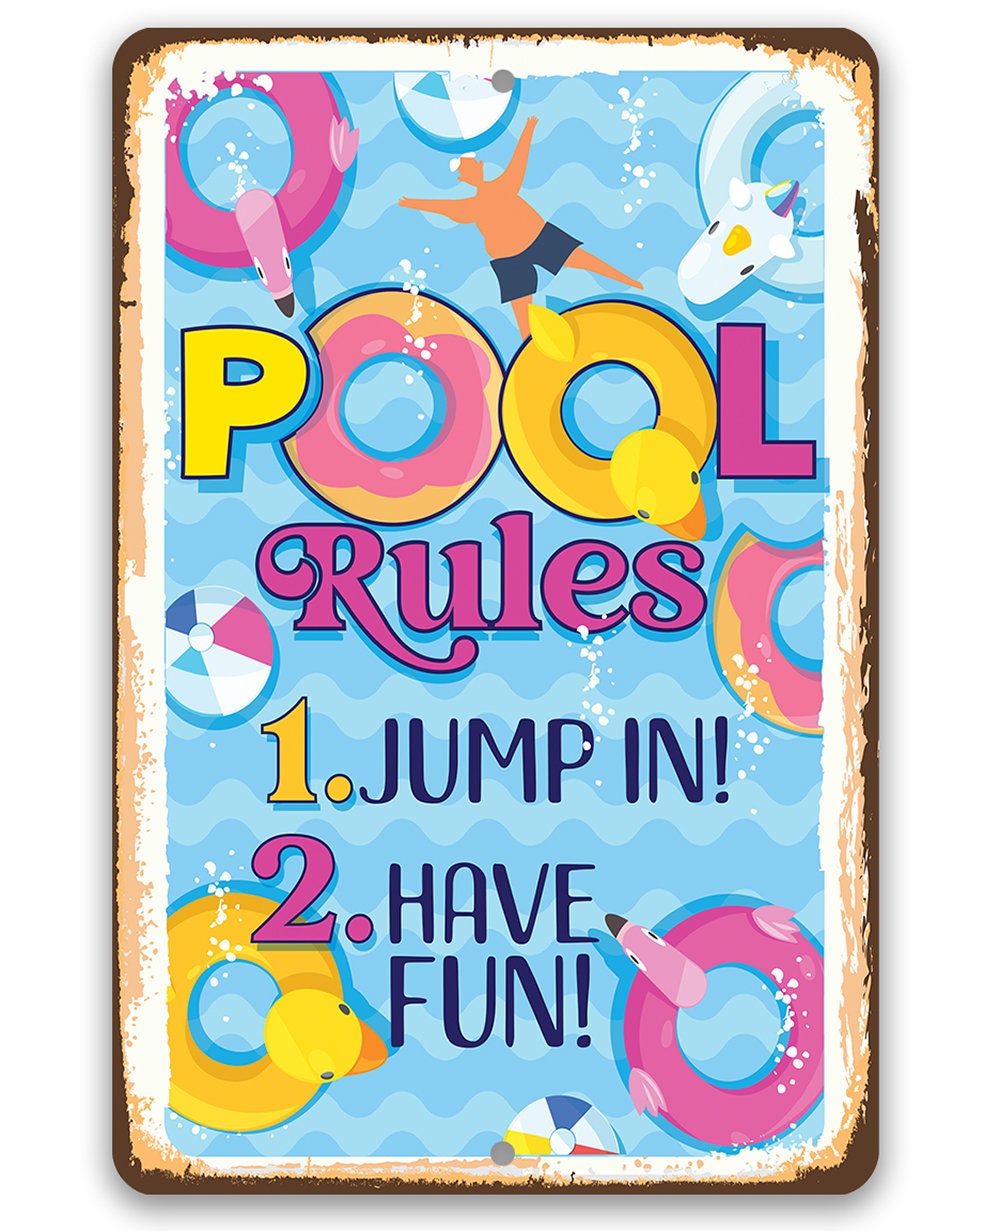 Pool Rules, Jump In, Have Fun - 8" x 12" or 12" x 18" Aluminum Tin Awesome Metal Poster Lone Star Art 